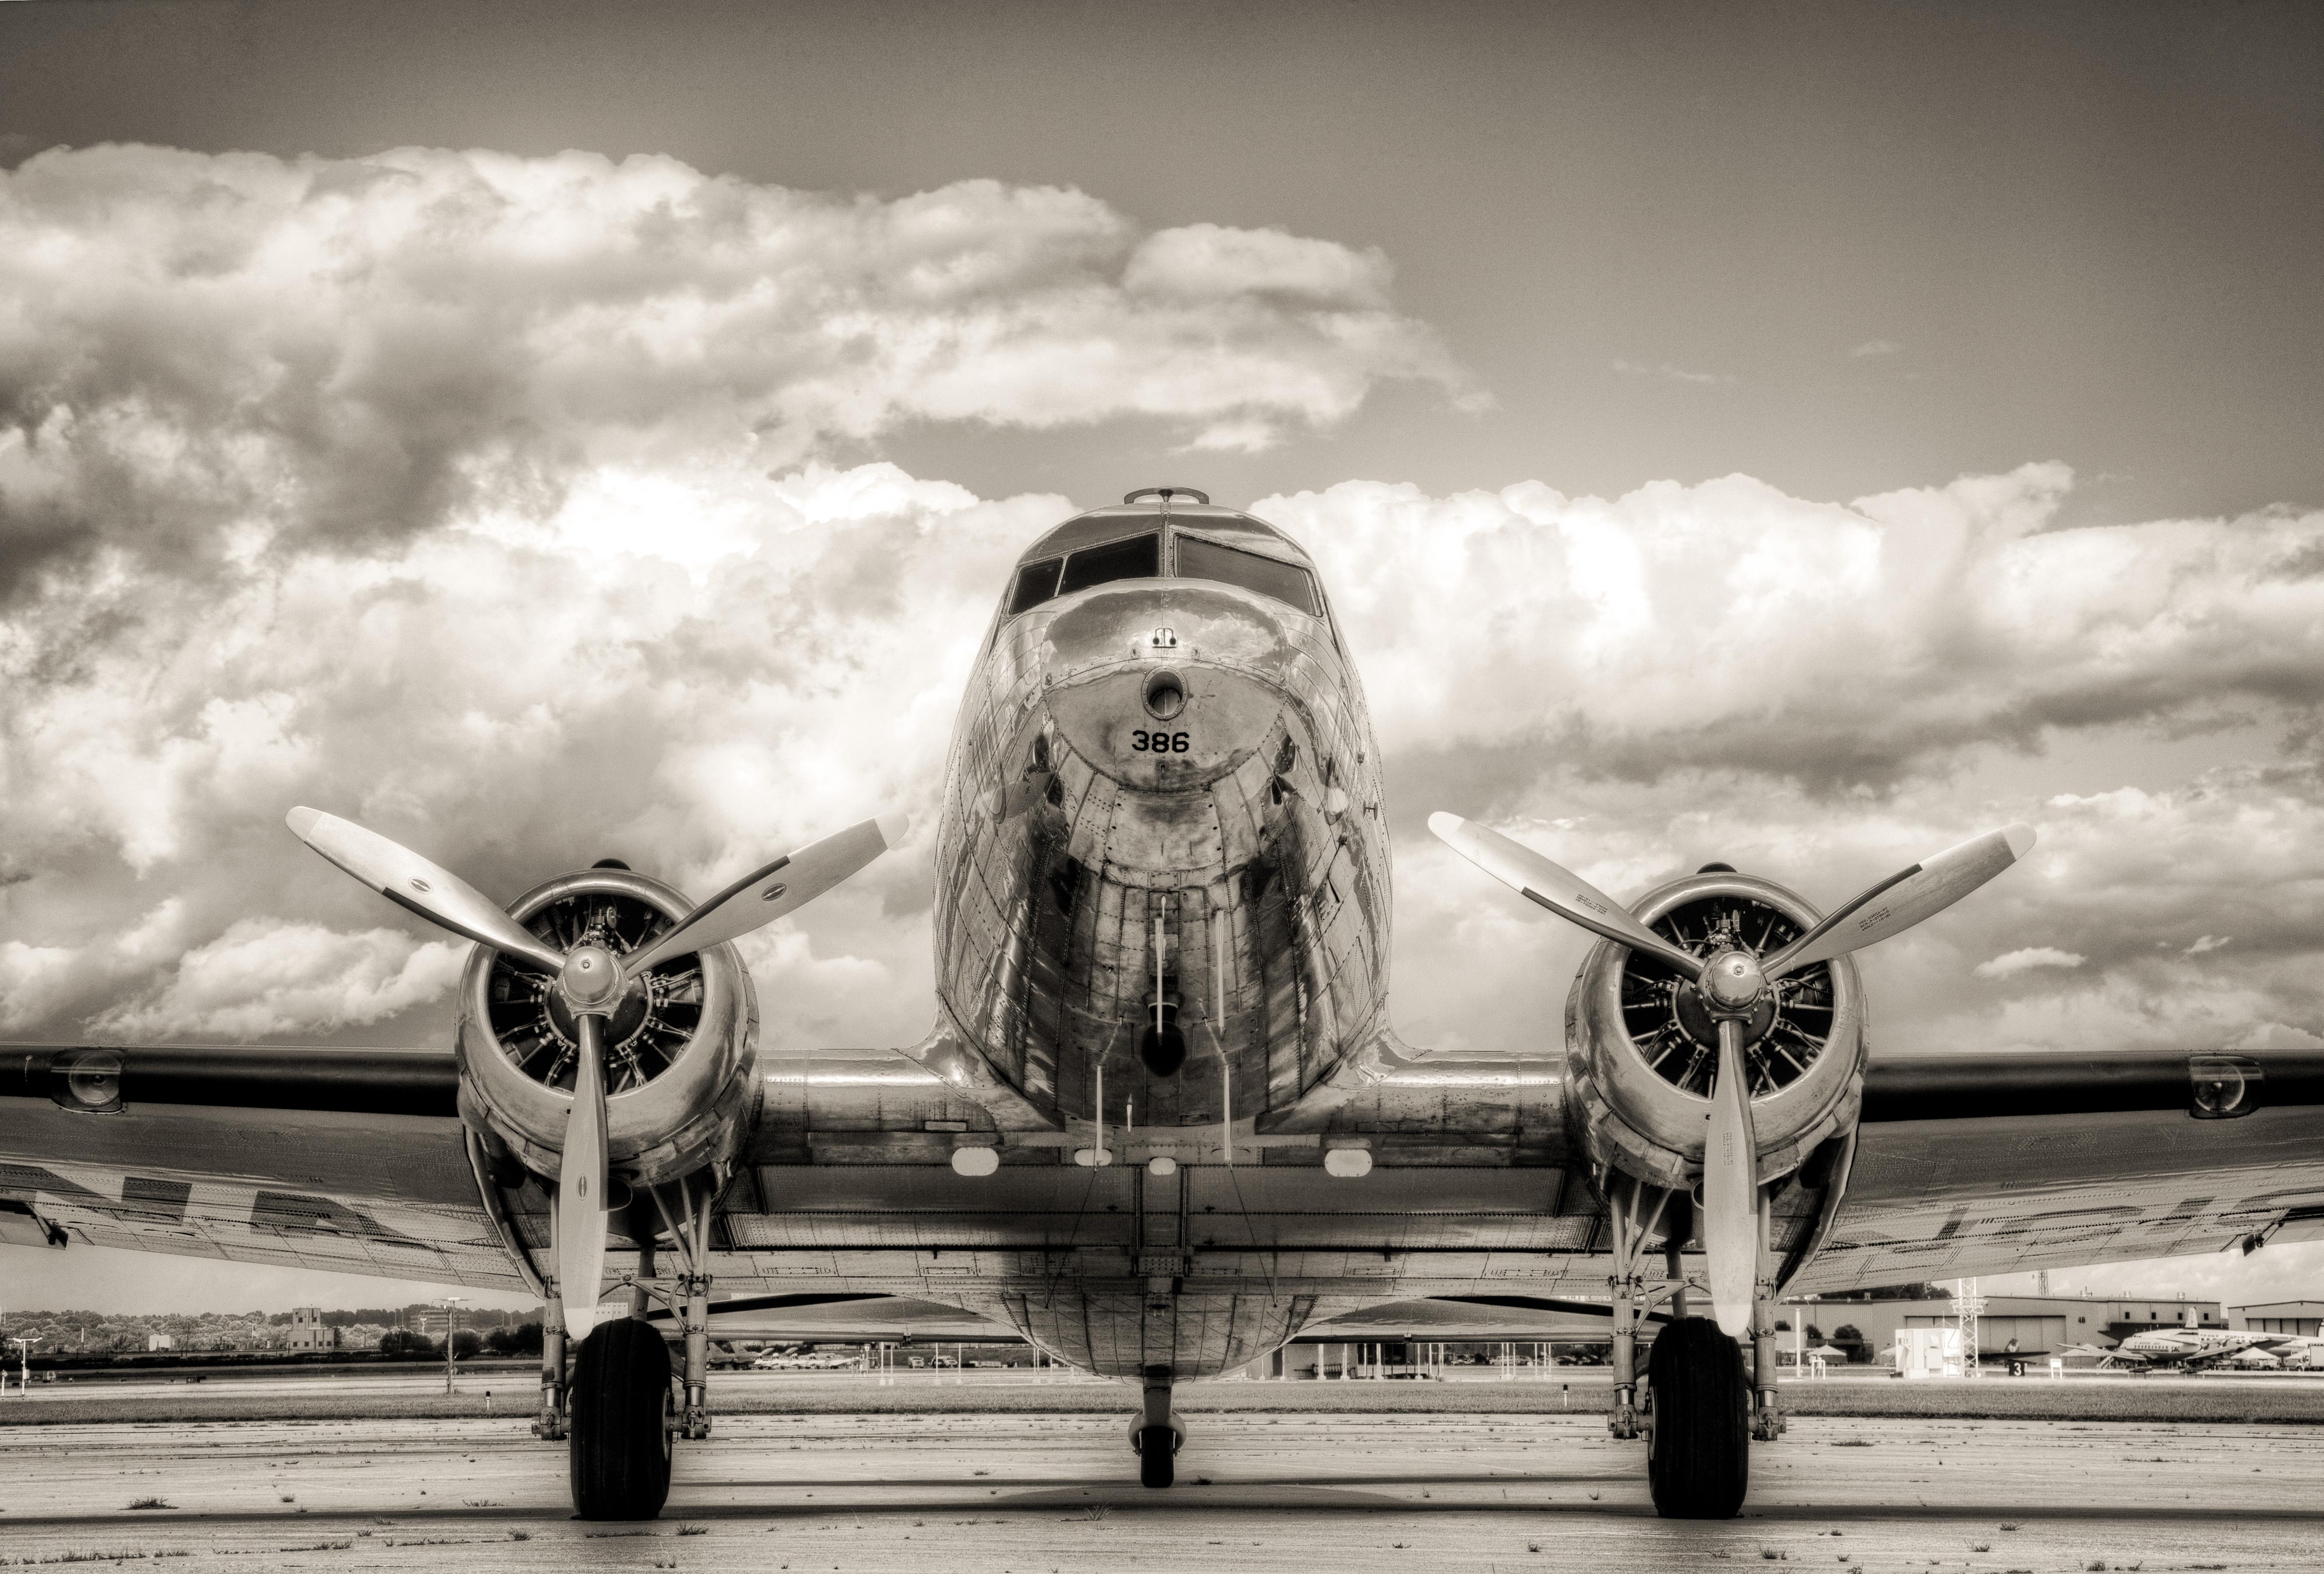 DC III Plane - Photograph by Nick Vedros